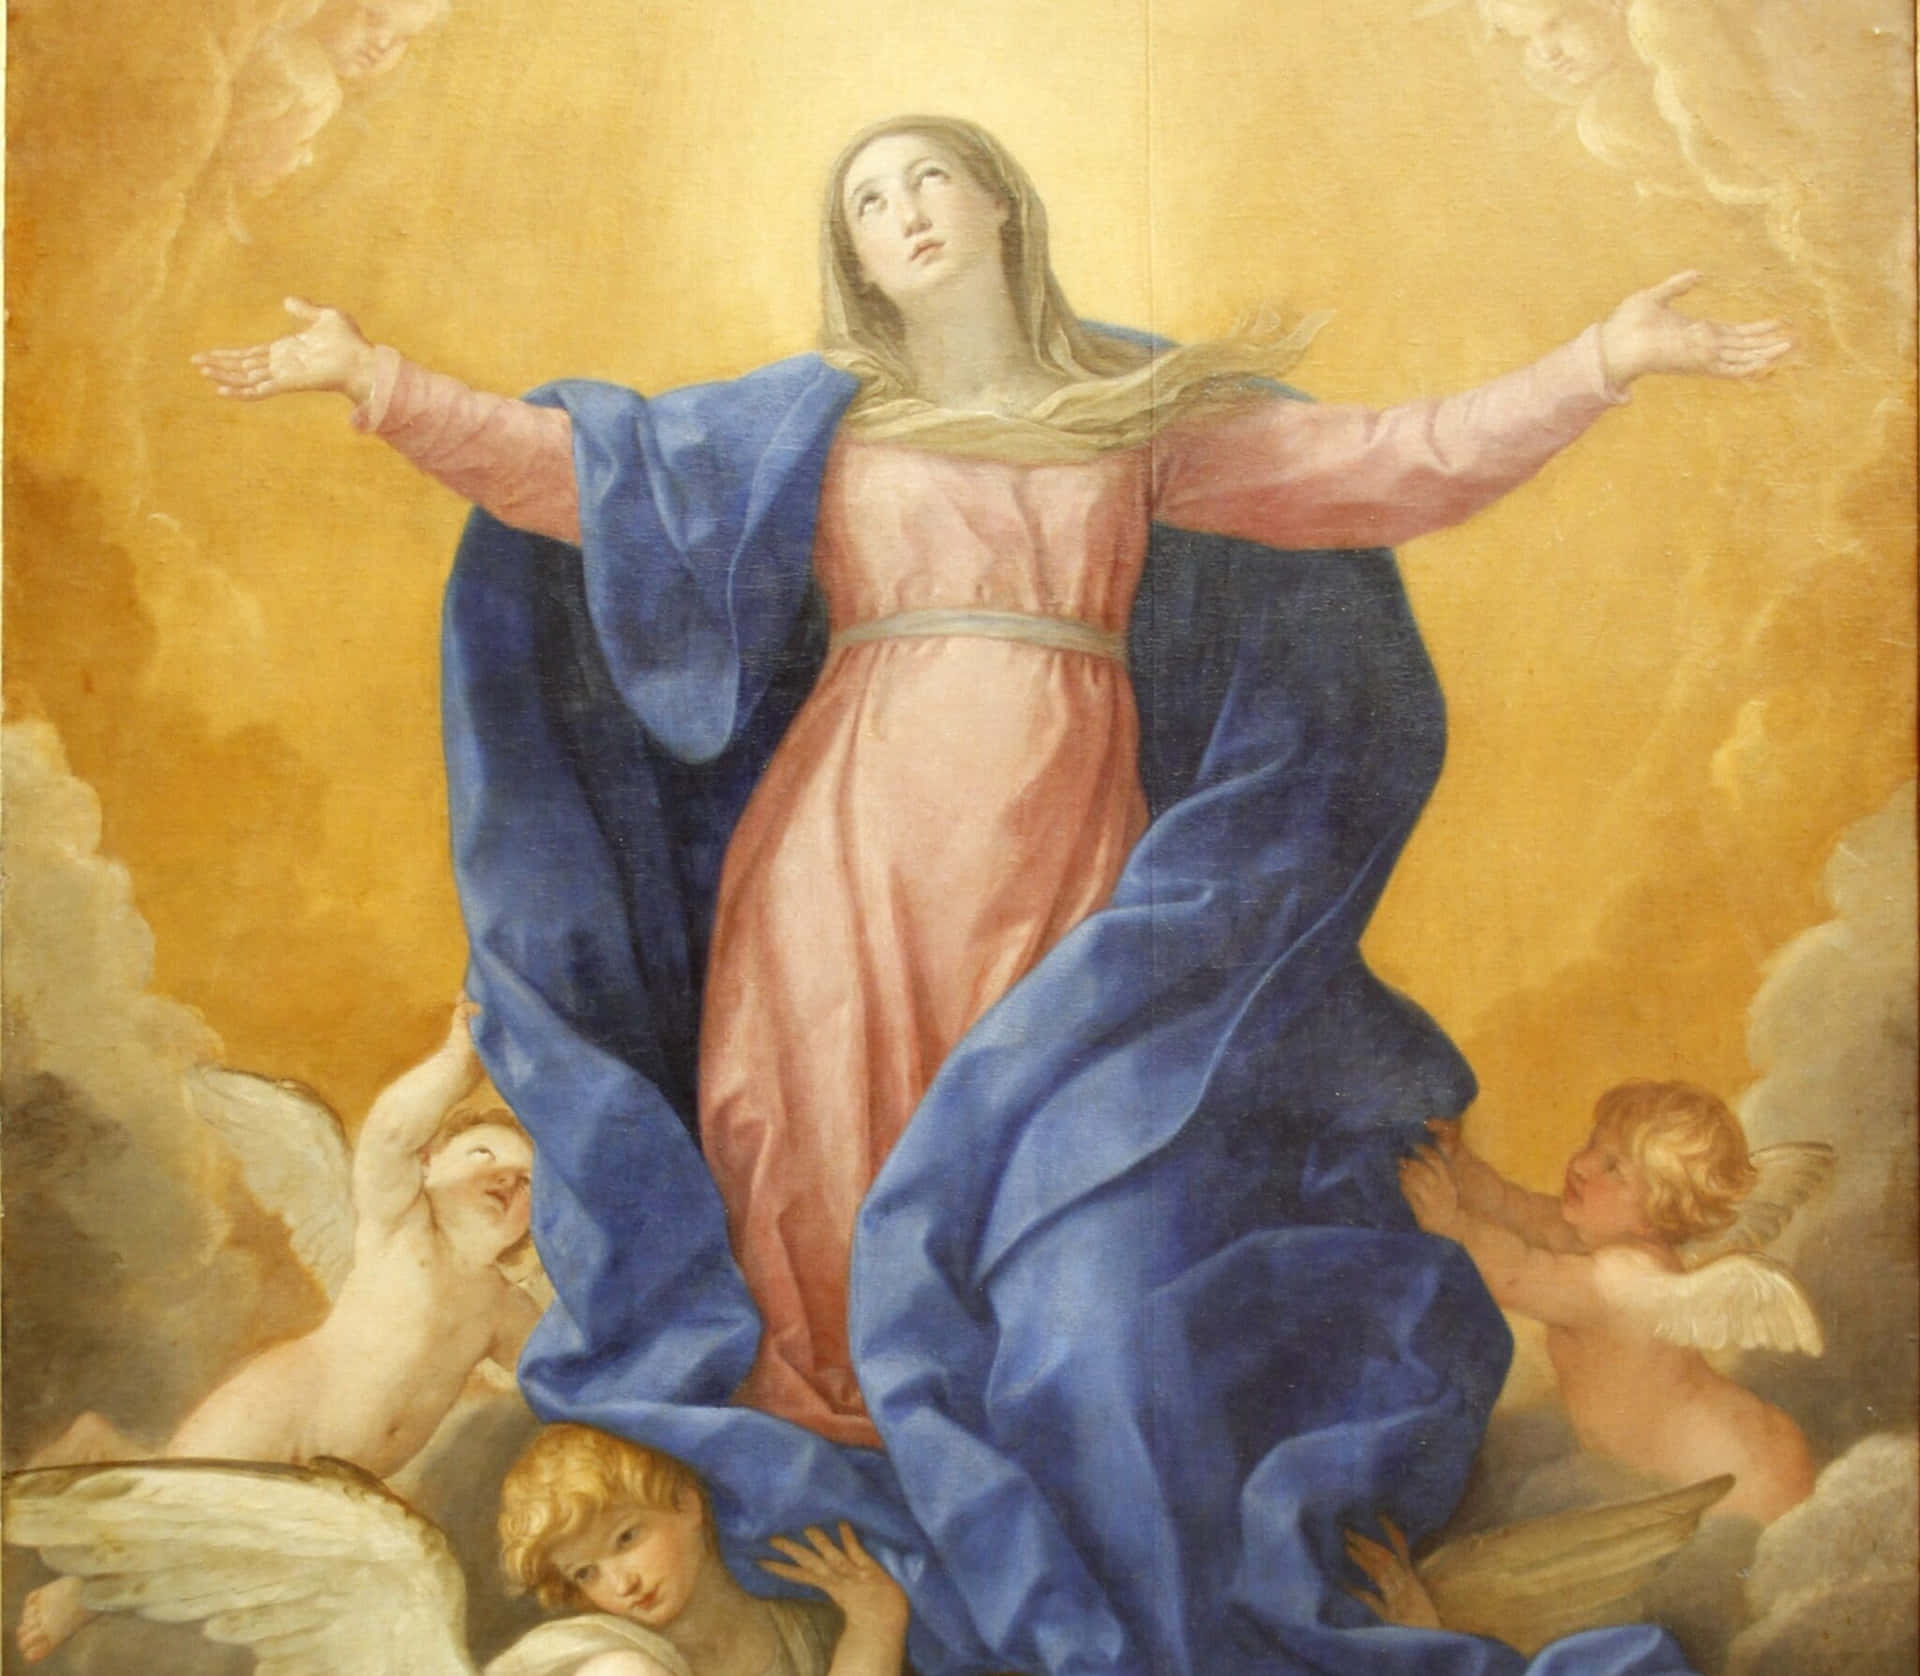 Divine Ascension Of Mother Mary Wallpaper